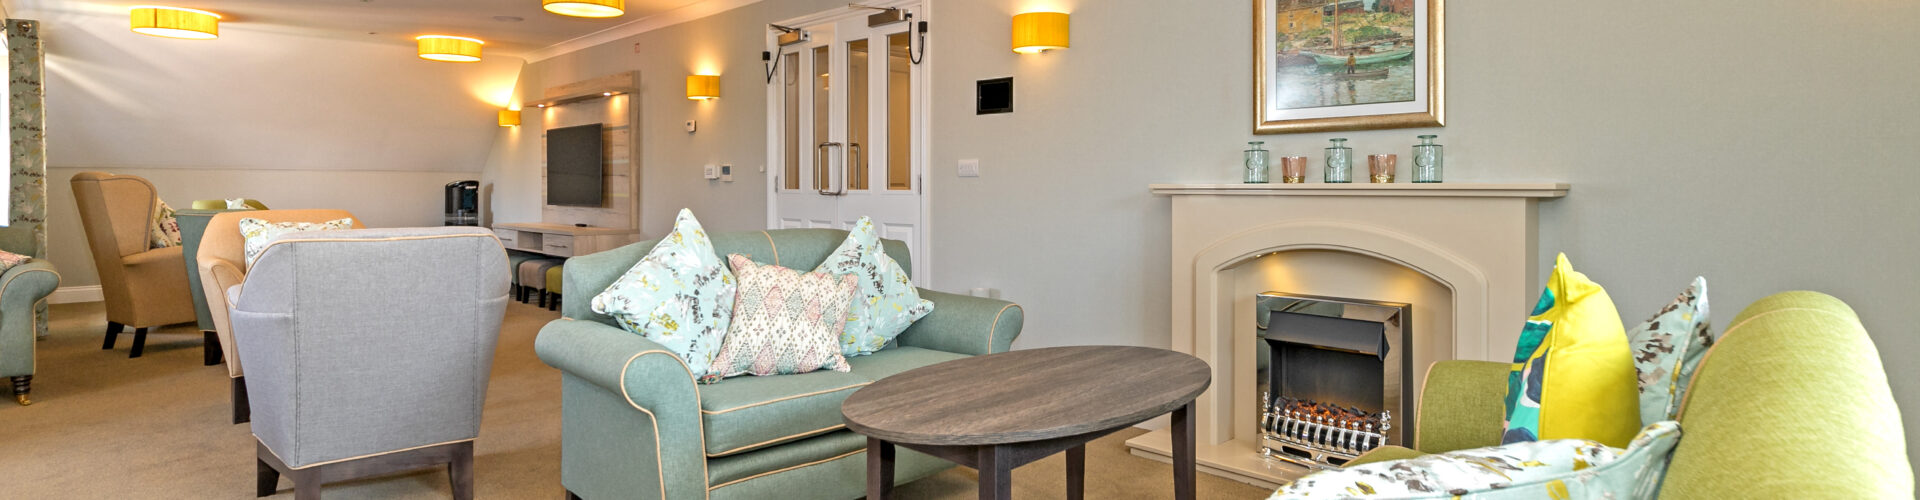 Lounge area with fireplace at Oakland Care Home in Eastbourne